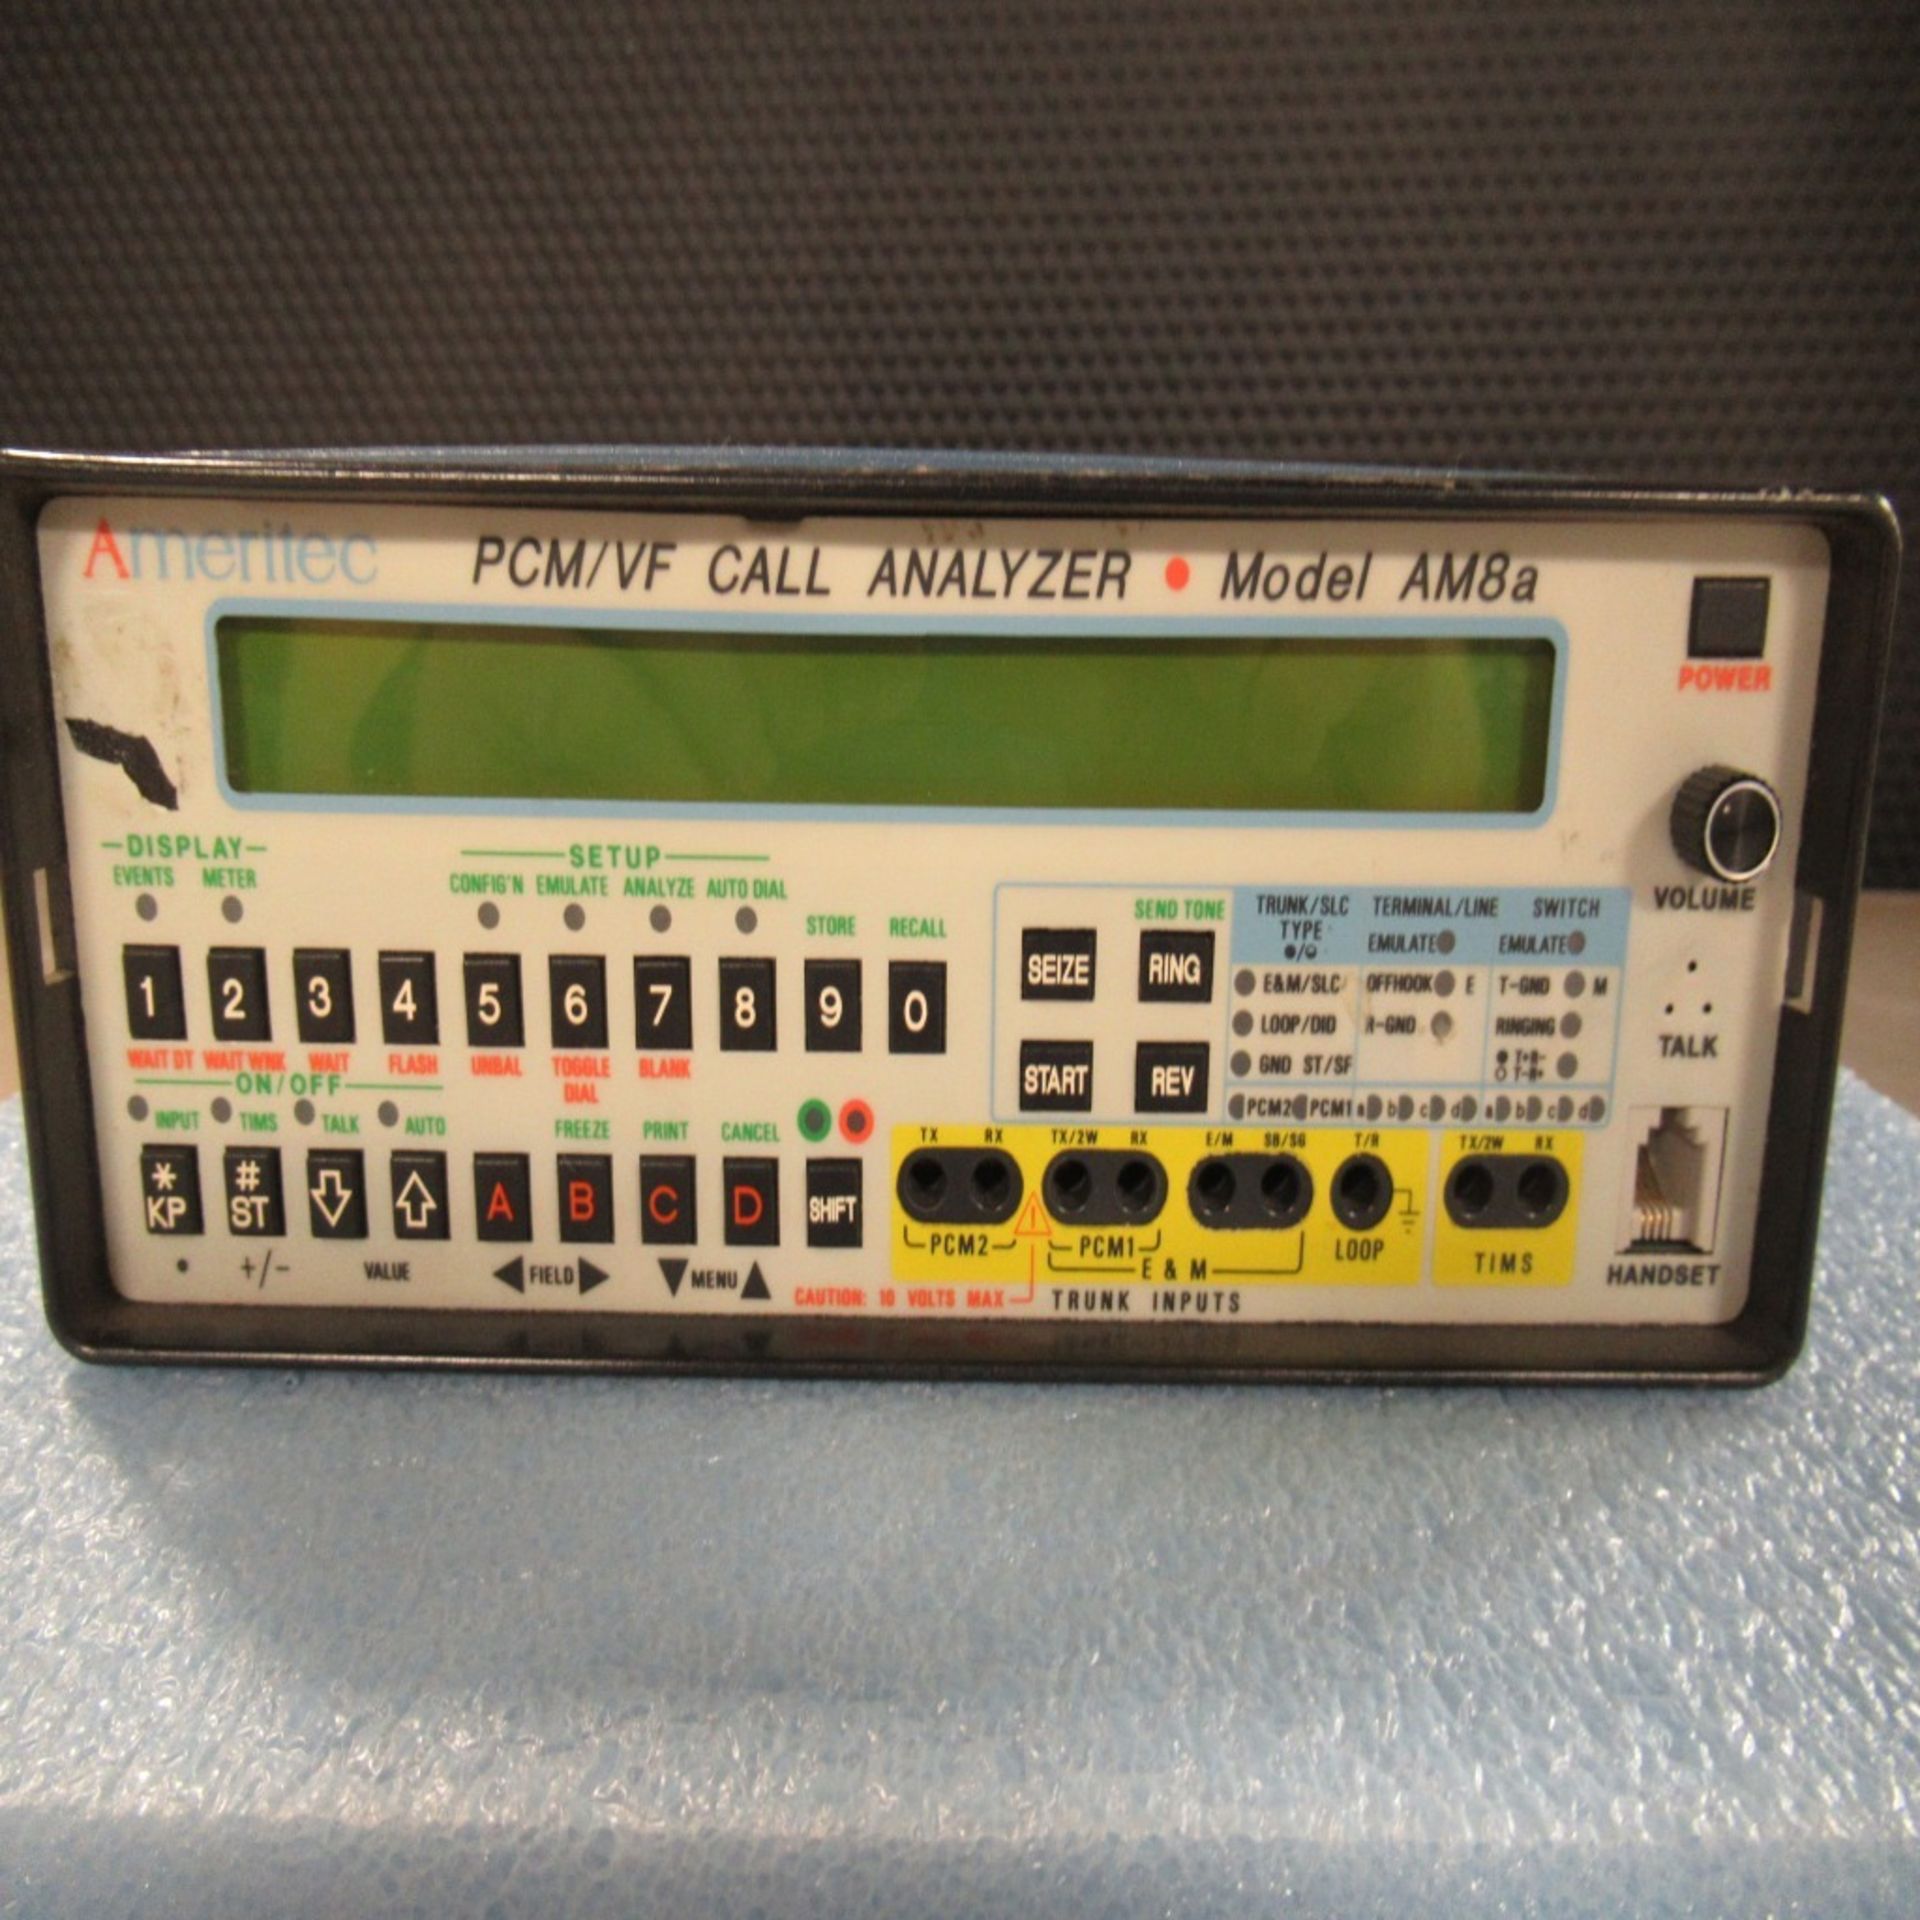 PHOTON SNAP SHOT MODEL 6000 *POWERS ON* NO SCREEN DISPLAY; FARNELL AP20-80 REGULATED POWER SUPPLY * - Image 199 of 222